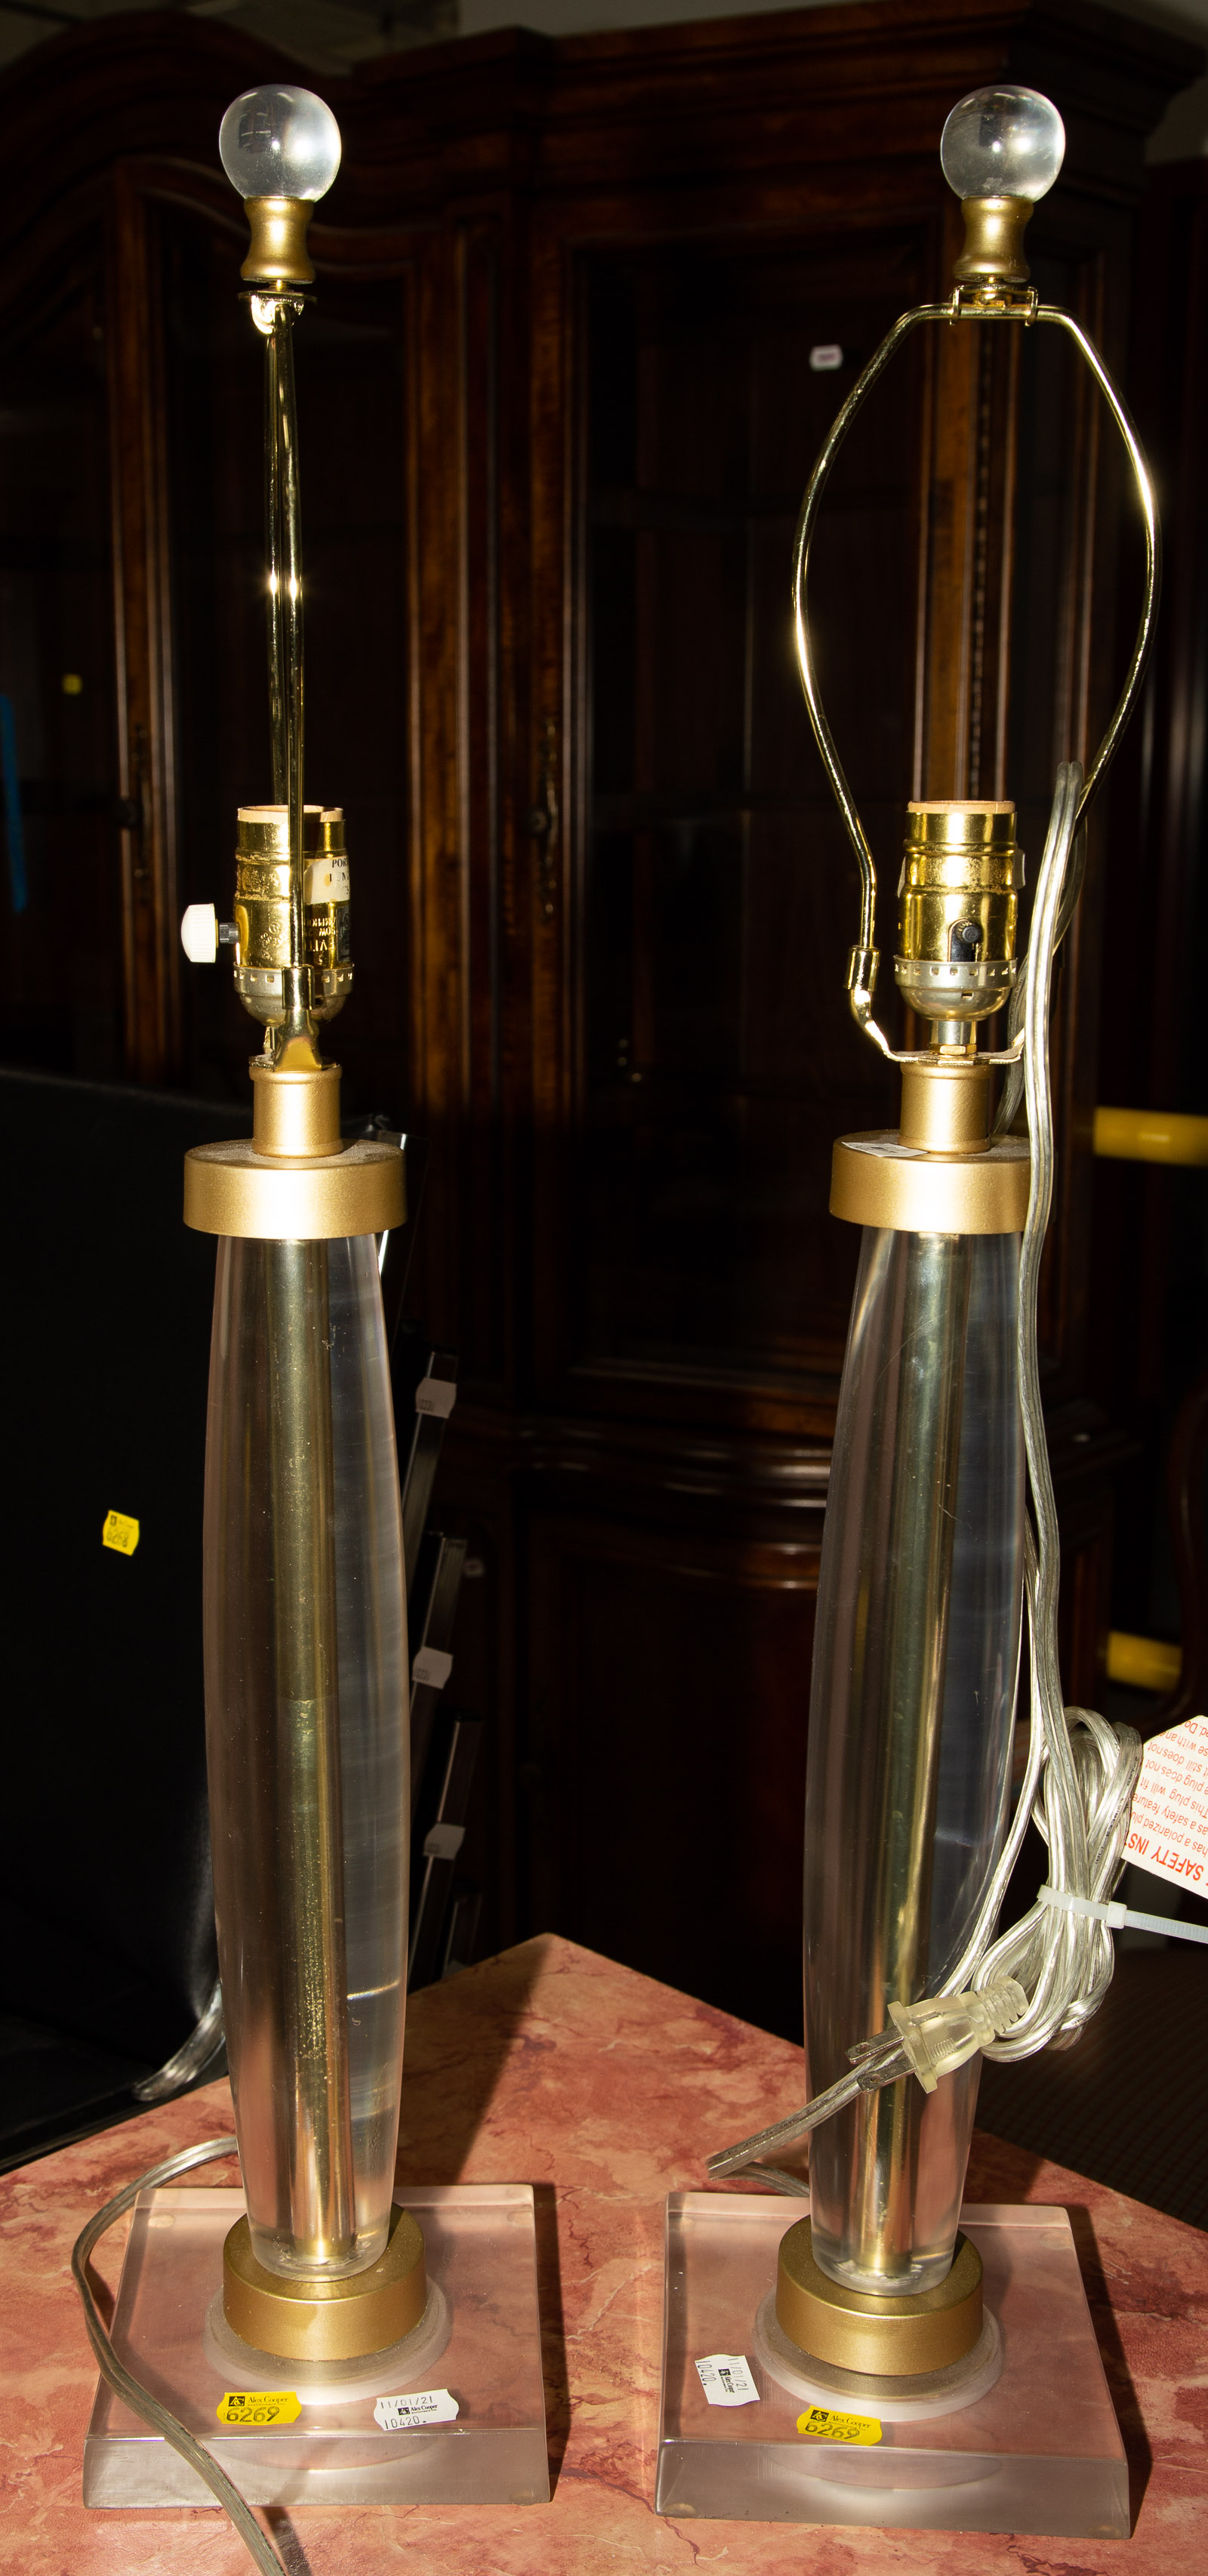 A PAIR OF LUCITE TABLE LAMPS WITH SHADES